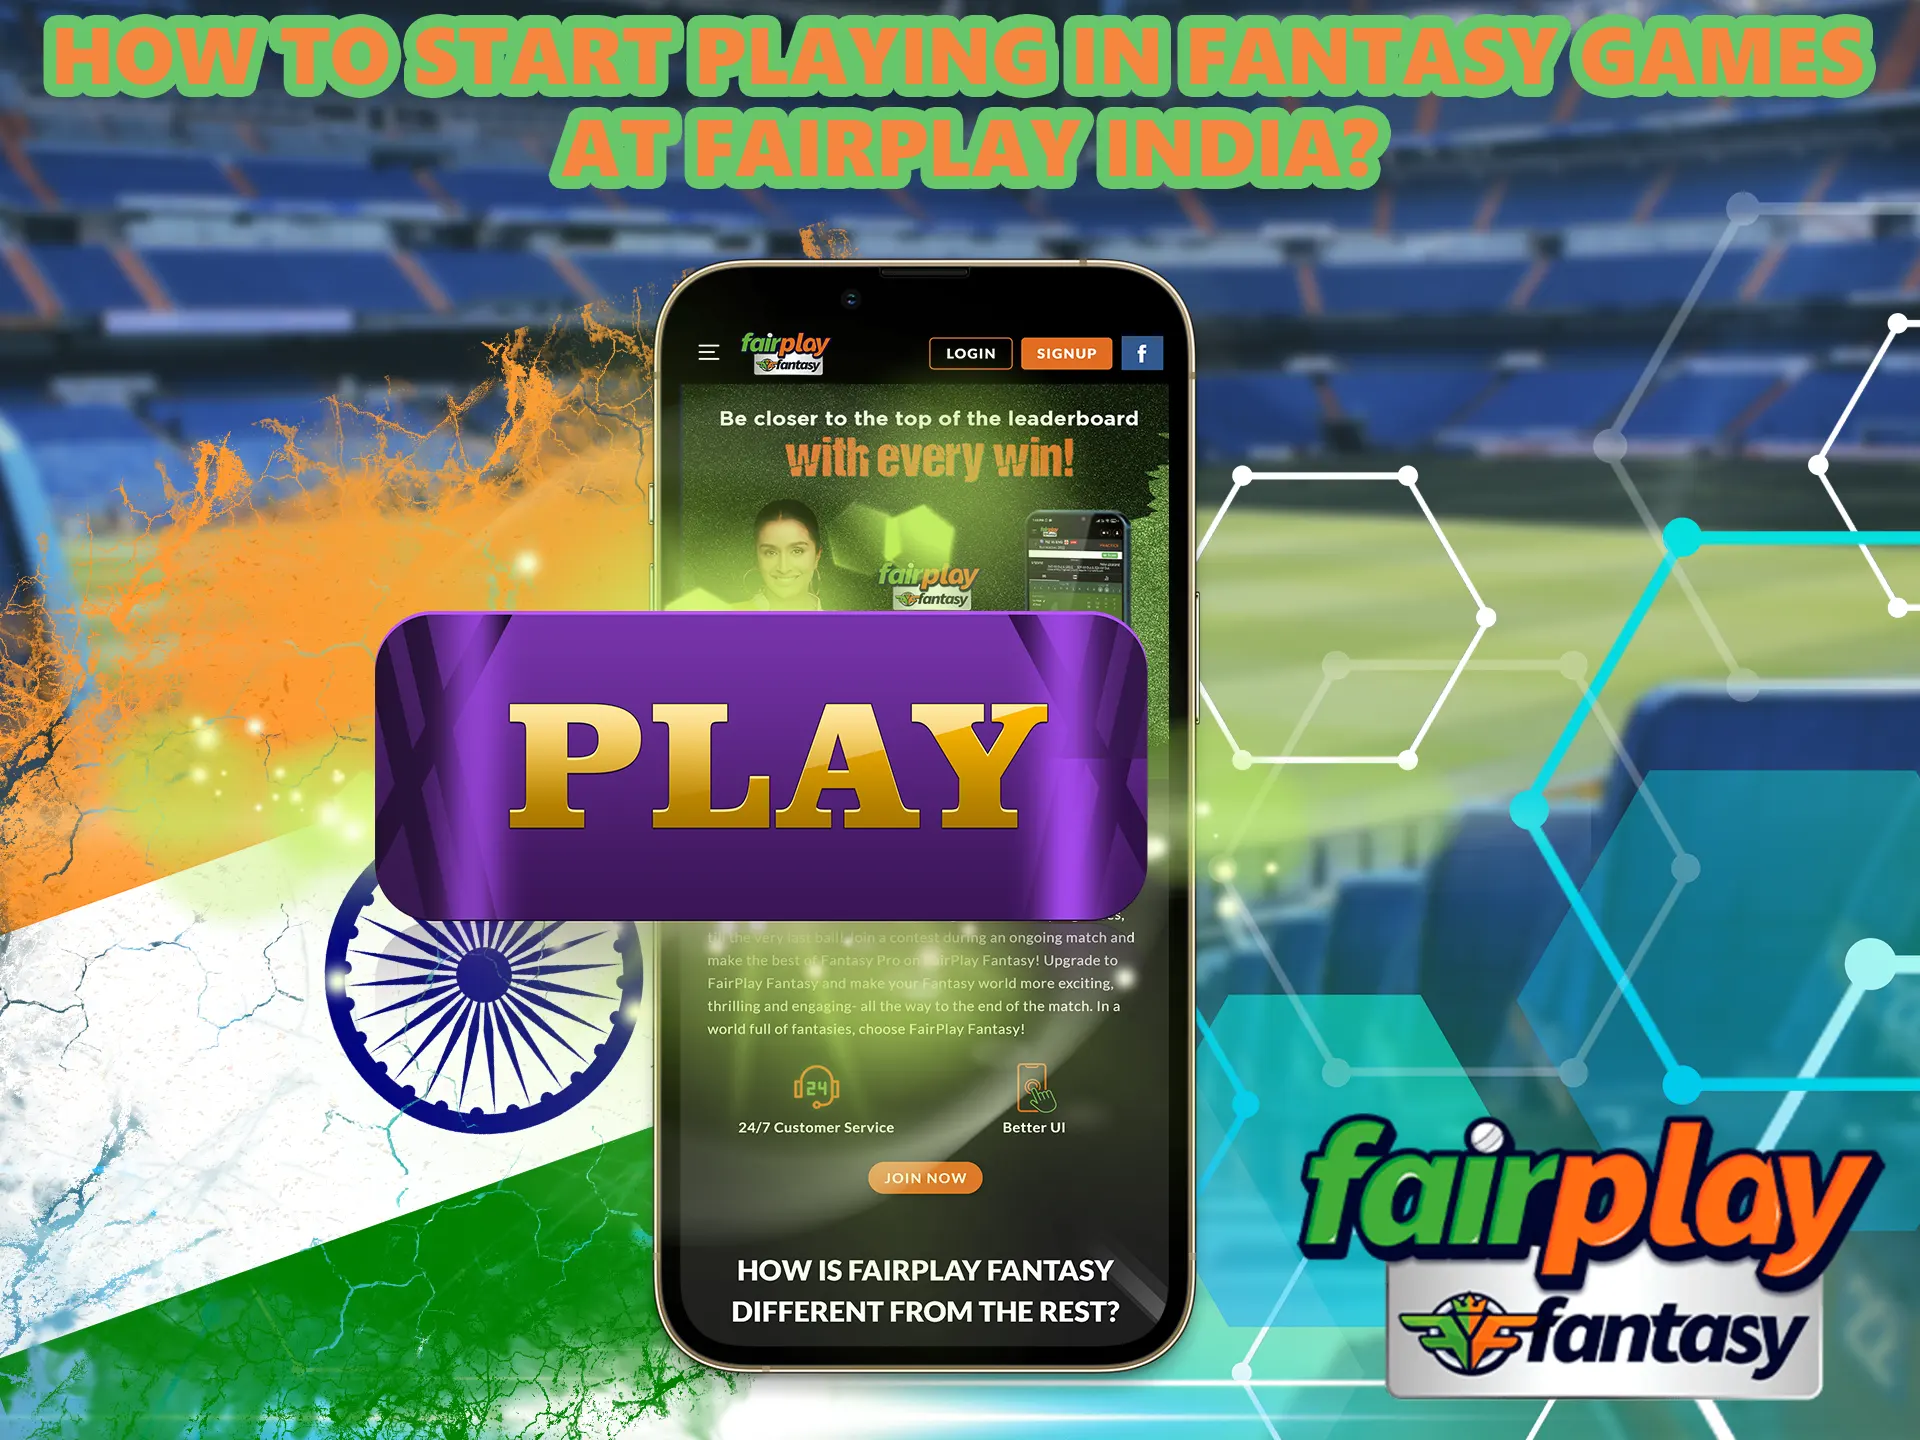 The Fairplay Fantasy app can be accessed and enjoyed by anyone with a smartphone at no extra cost, as long as the player is over 18 years old.